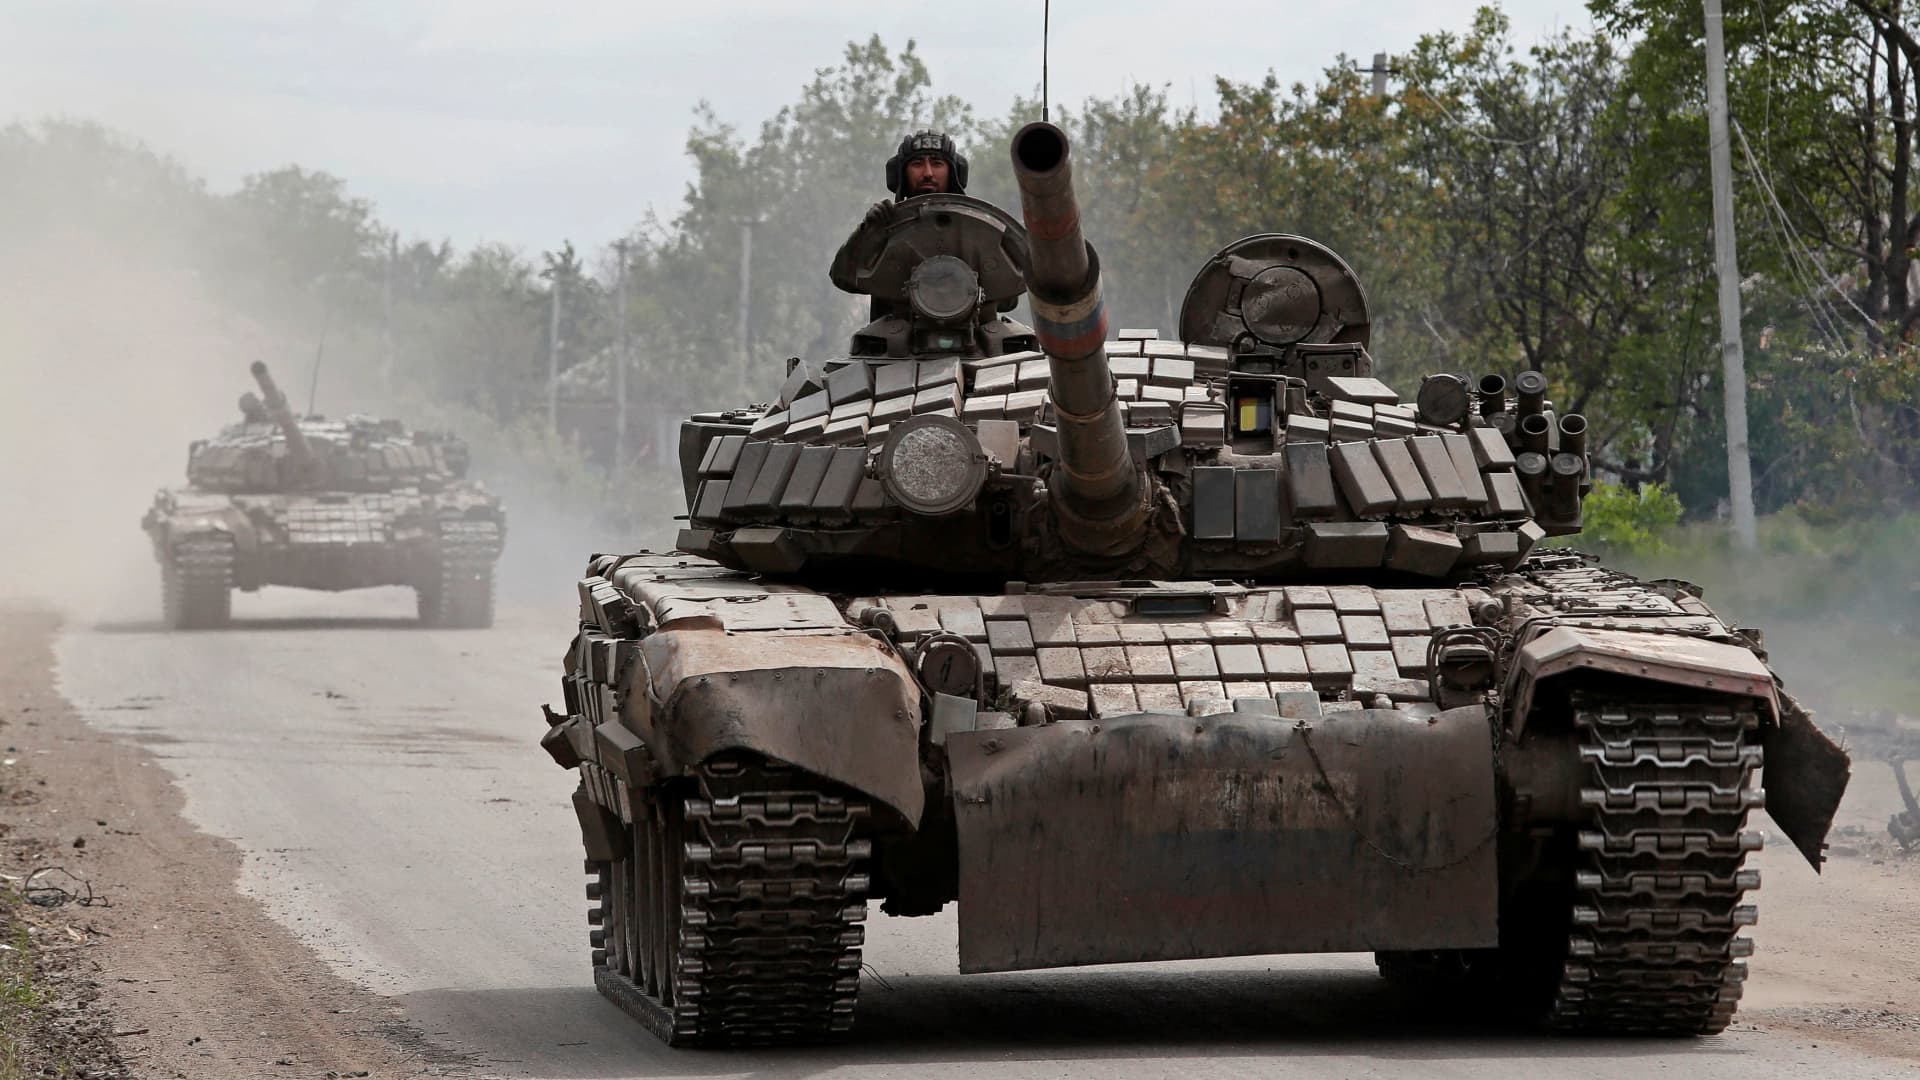 Tanks of pro-Russian troops drive along a street in the town of Popasna in the Luhansk region of Ukraine on May 26, 2022.